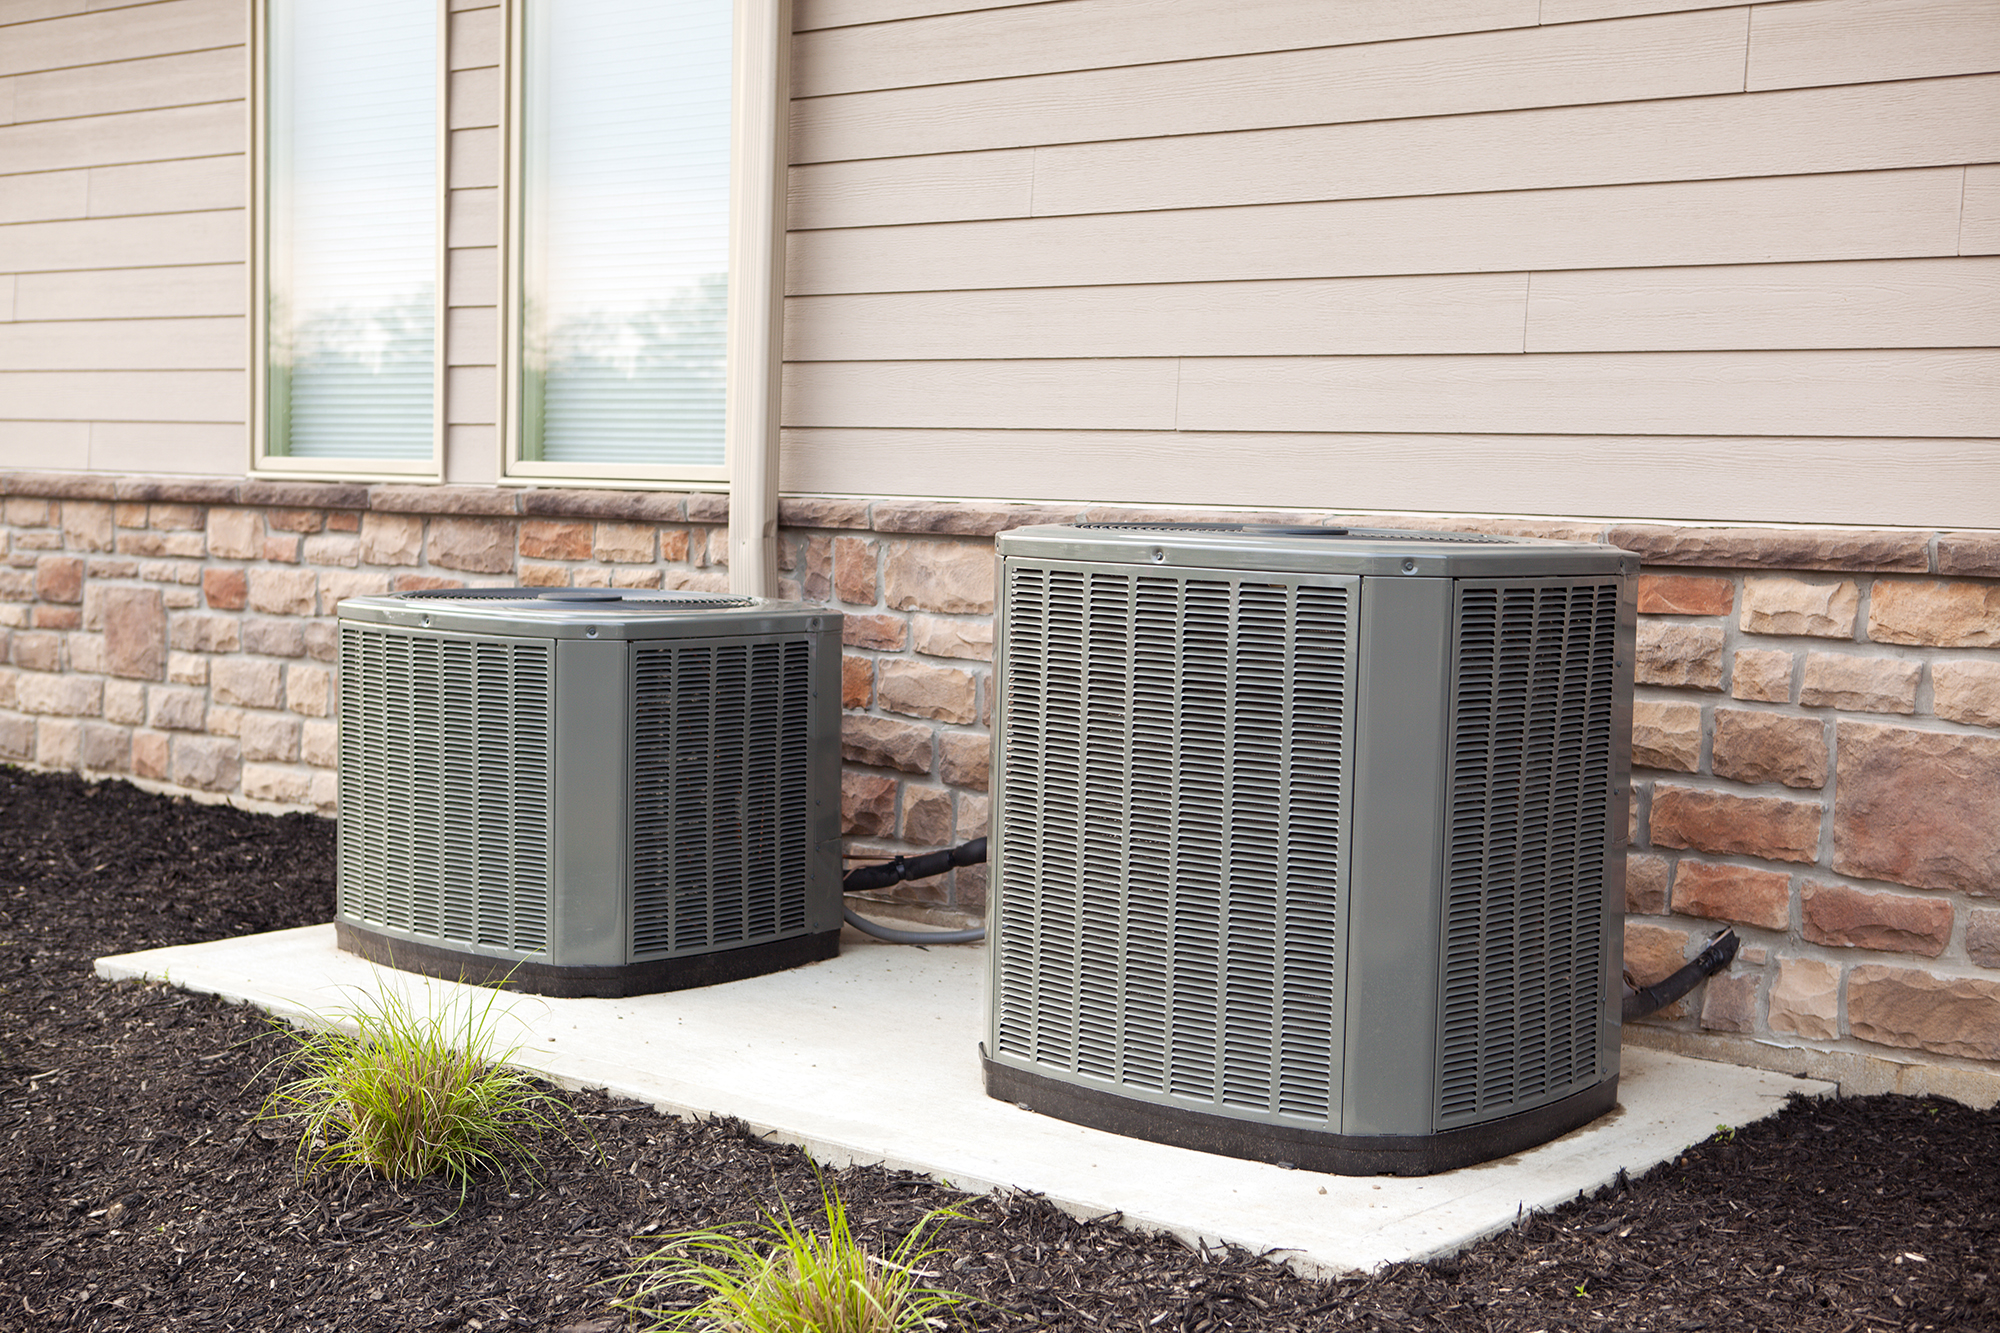 LIHEAP isn’t just for winter. It helps cover air conditioning costs in the summer, too. (Photo By: Getty Images)